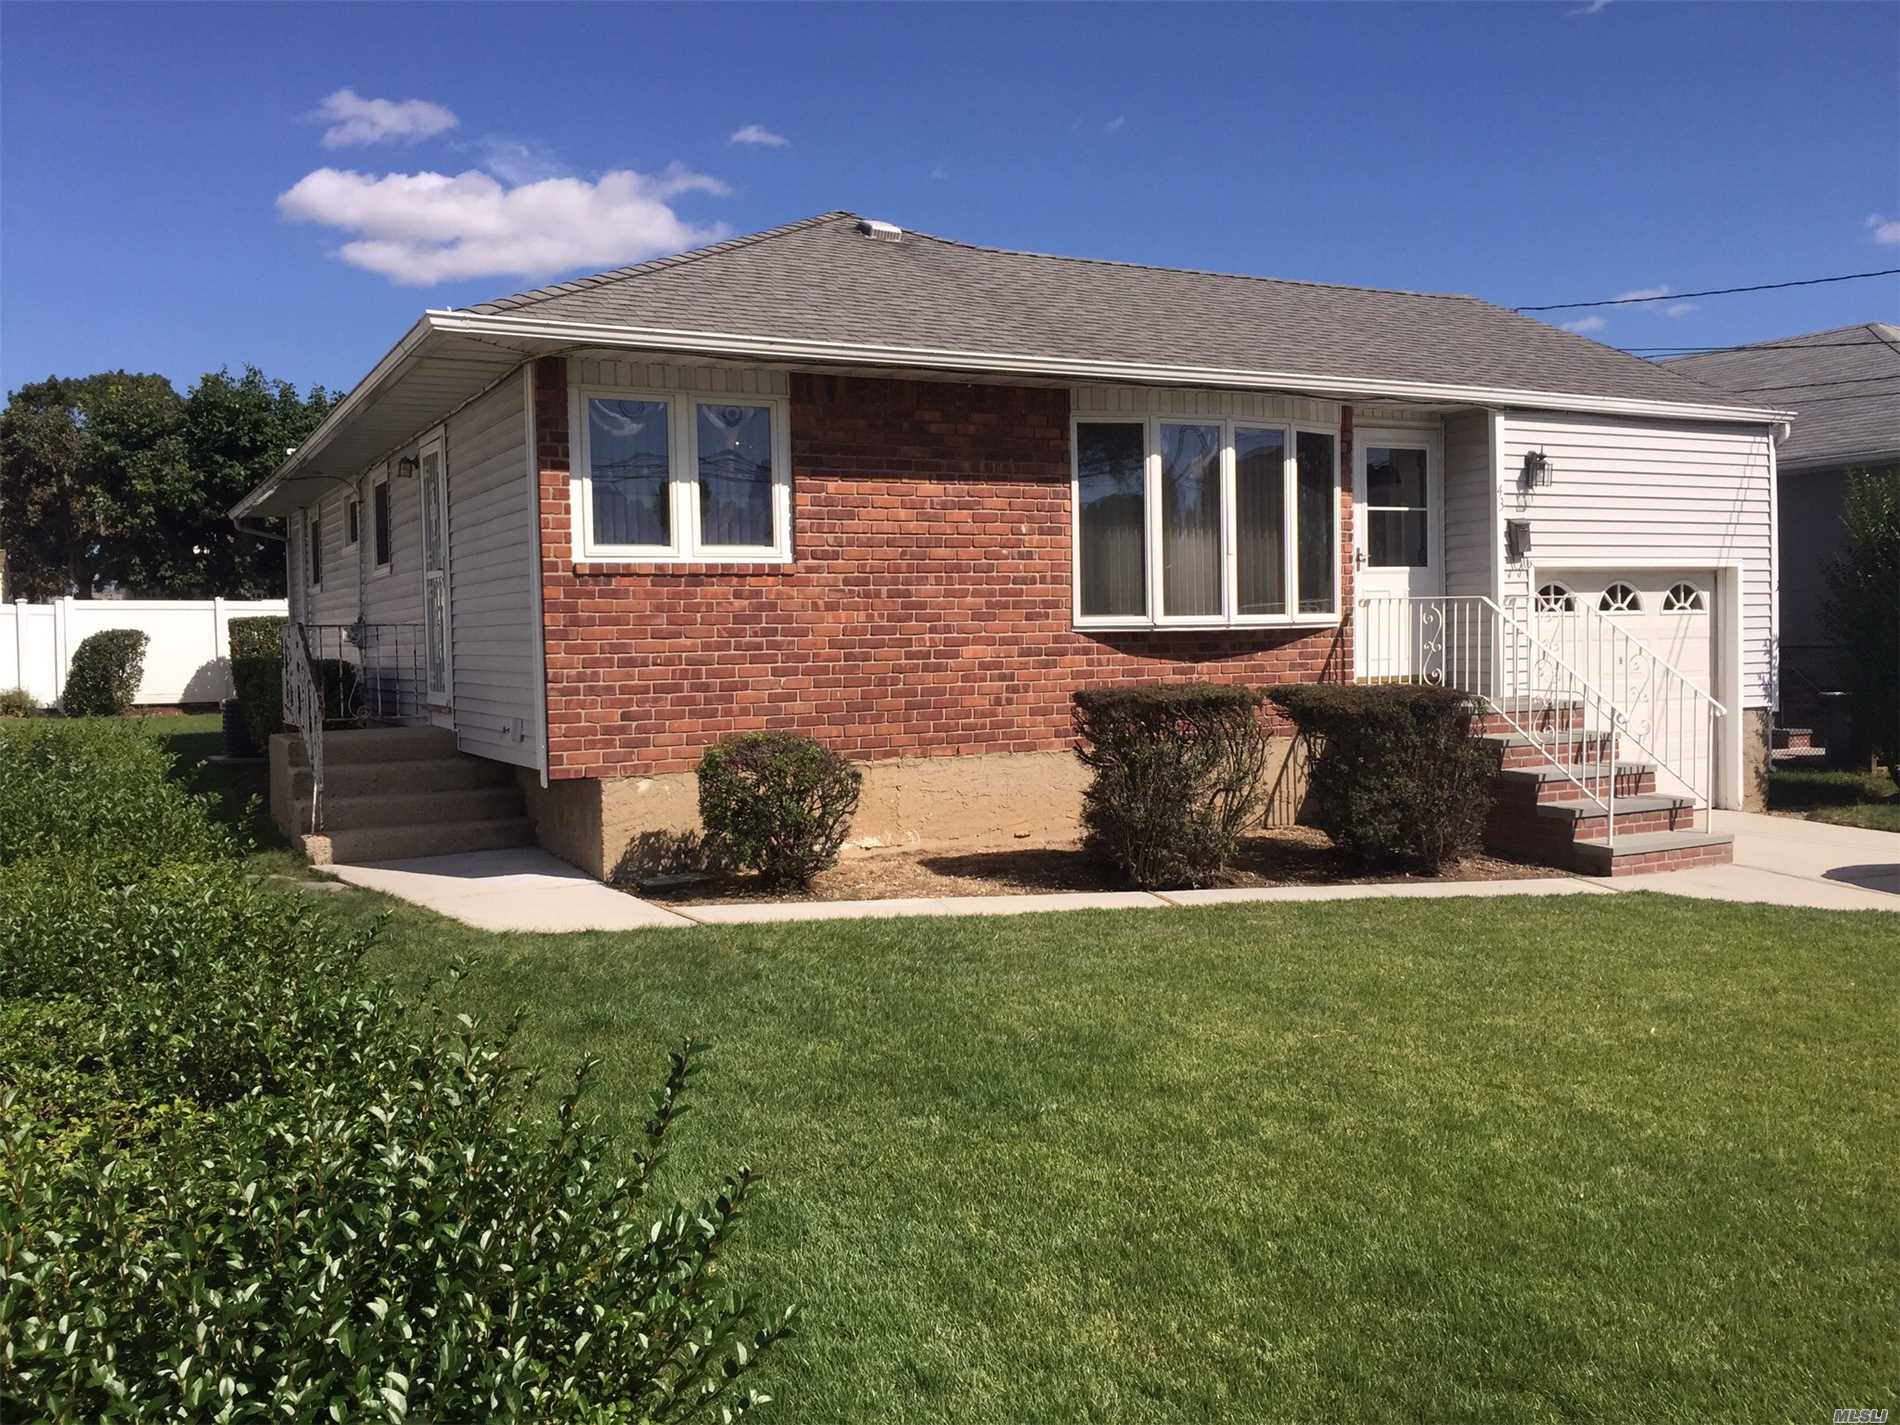 Newly Renovated Ranch On A Dead-End-St.3 Br, 2 Full Bath. Brand New Eik W/Quartz Counter Top & All New S.S. Appliances. Brand New Kohler Bathroom. Formal Dr. Refinished Beautiful Oak Floors Throughout. Central Air. Finished Large Bsmt W/Great Party Room & Full Bath.